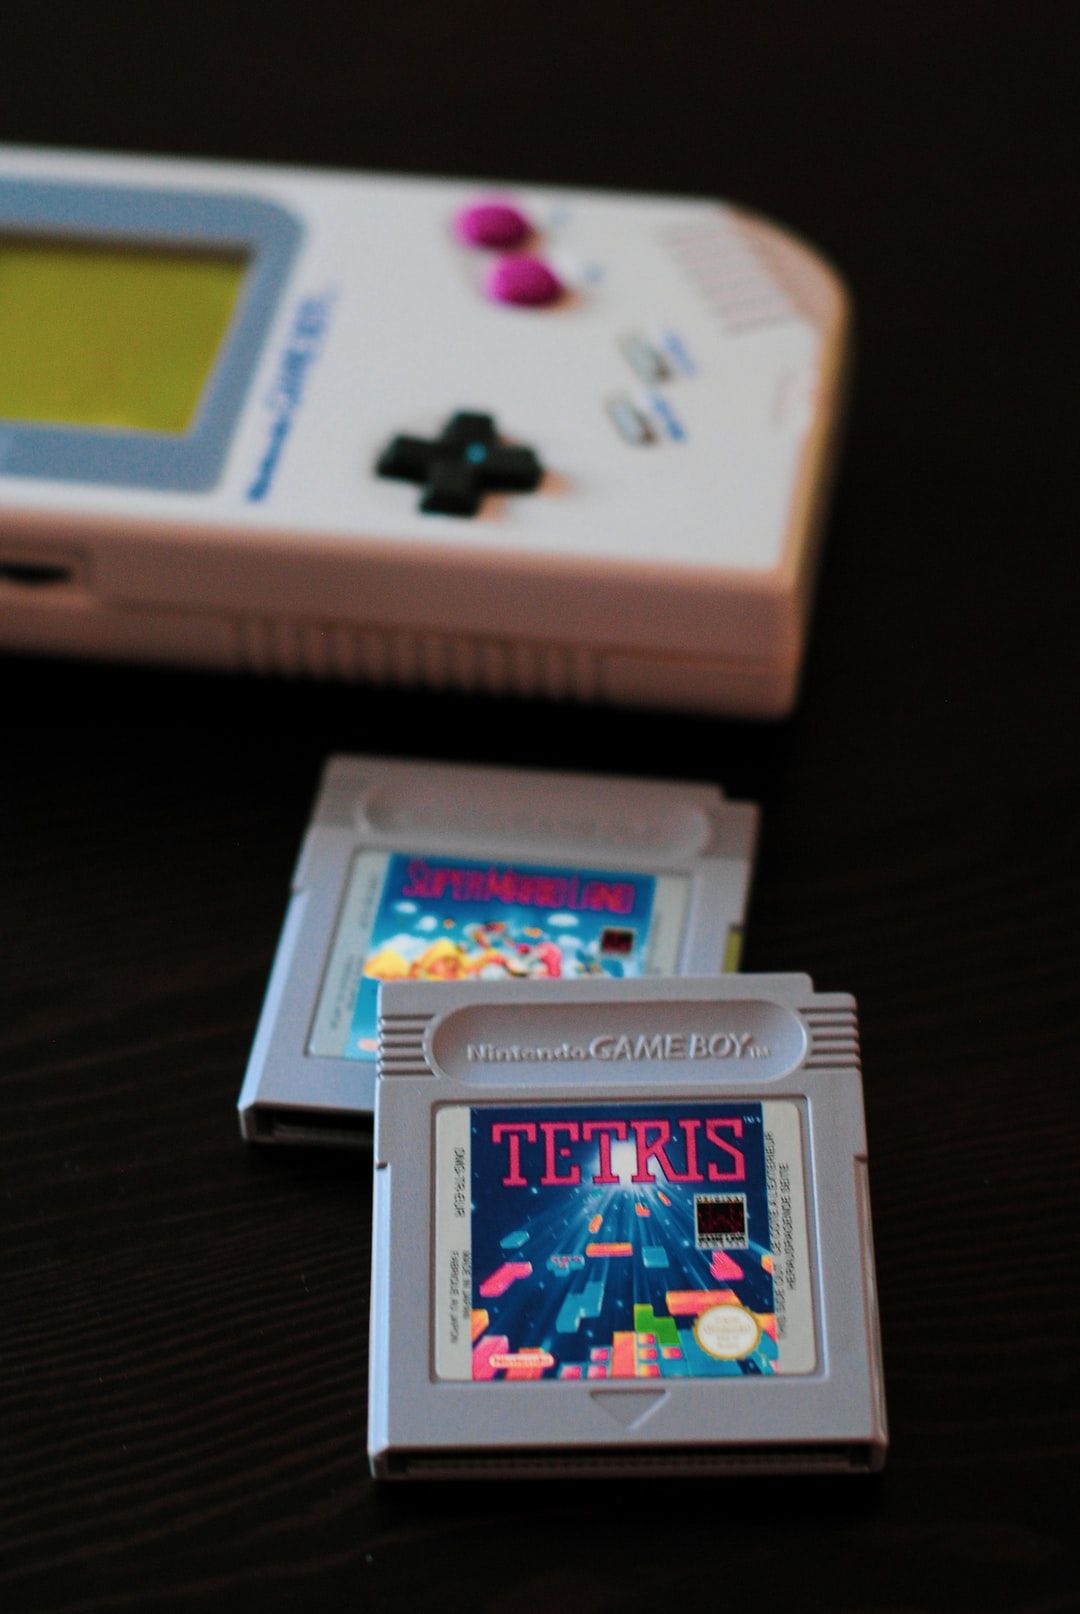 Game Boy Picture. Download Free Image